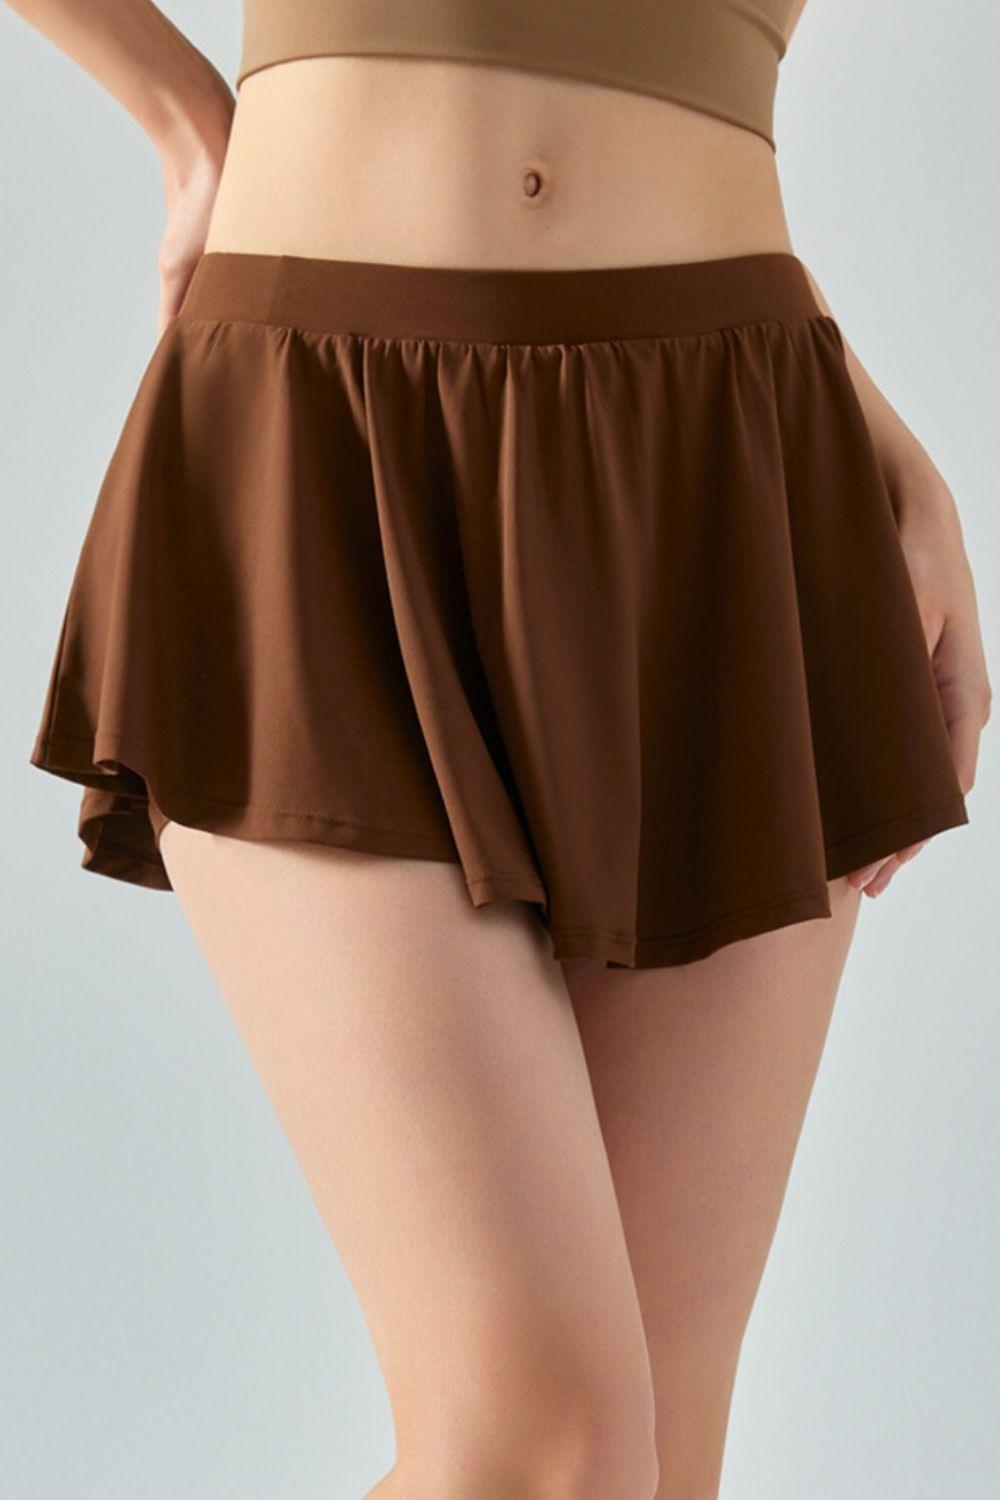 a woman wearing a brown skirt with a tan top